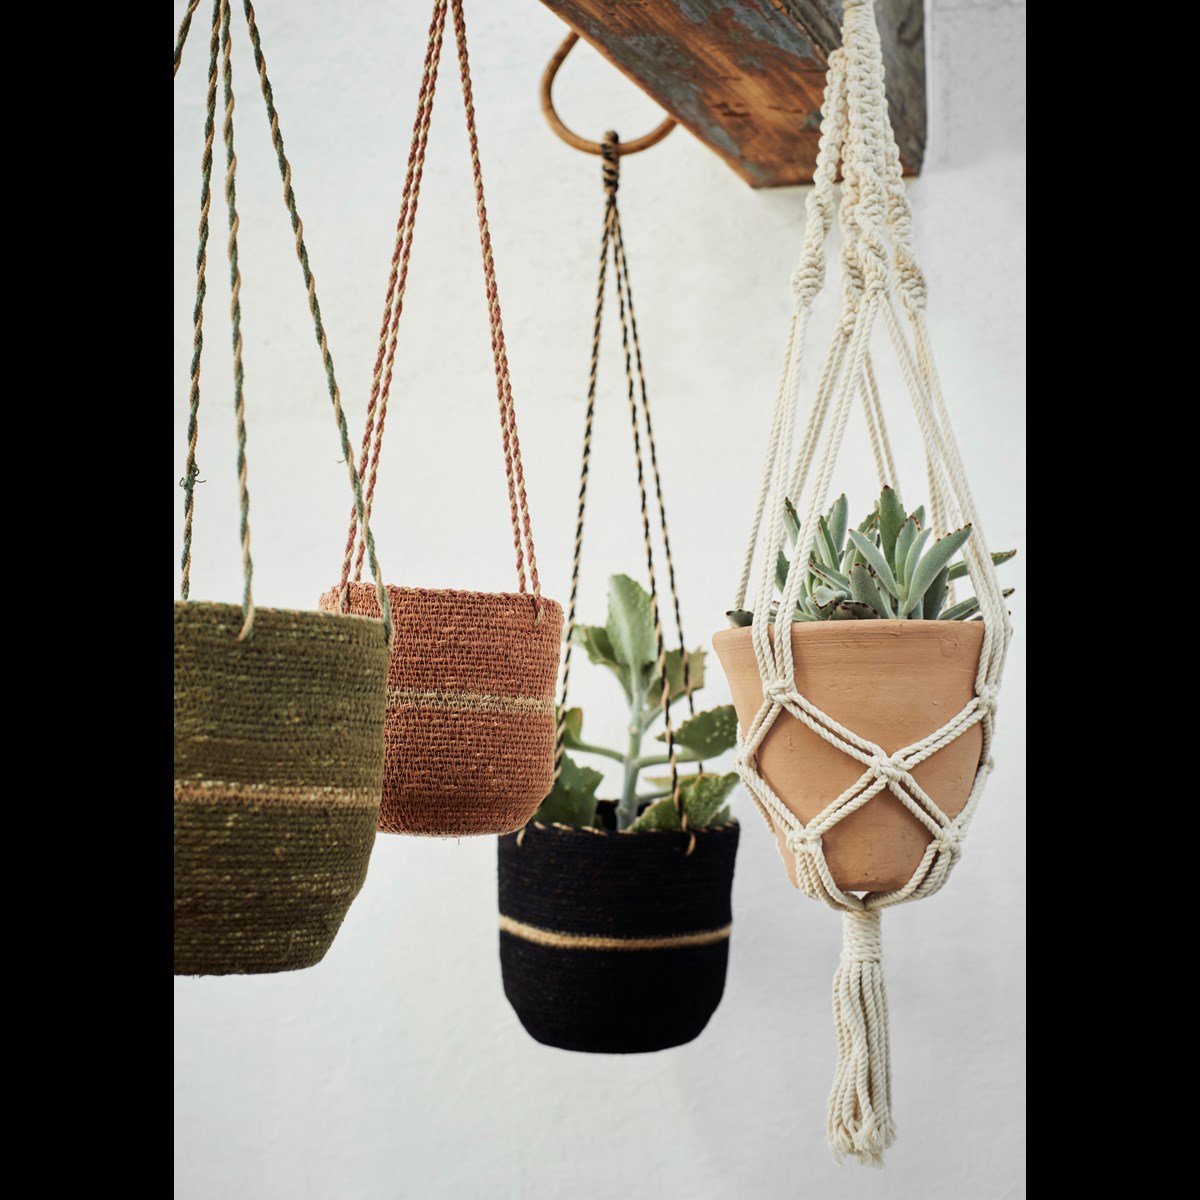 Hanging seagrass baskets